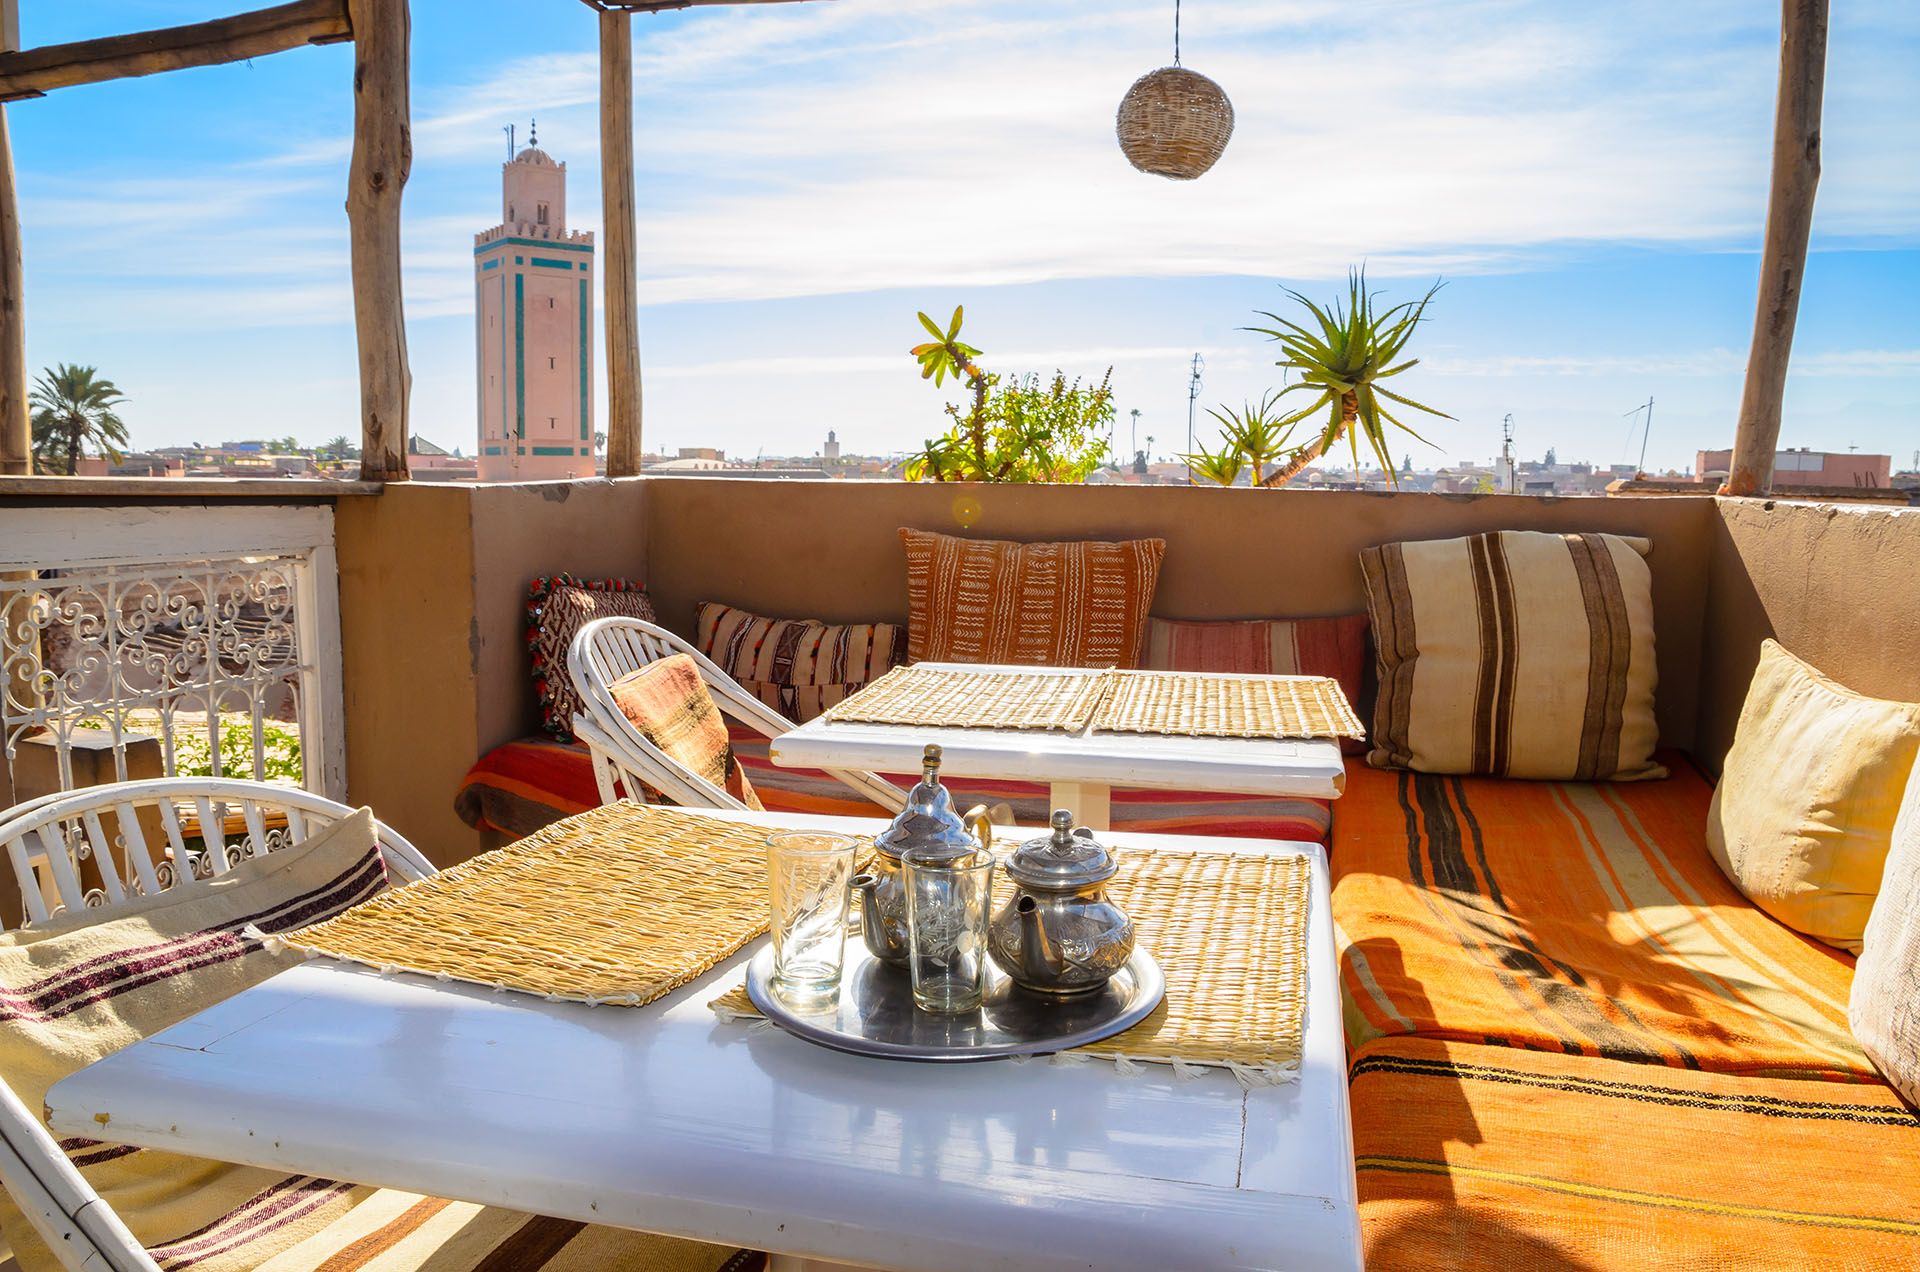 Taditional moroccan cafe in Marrakesh © Shutterstock